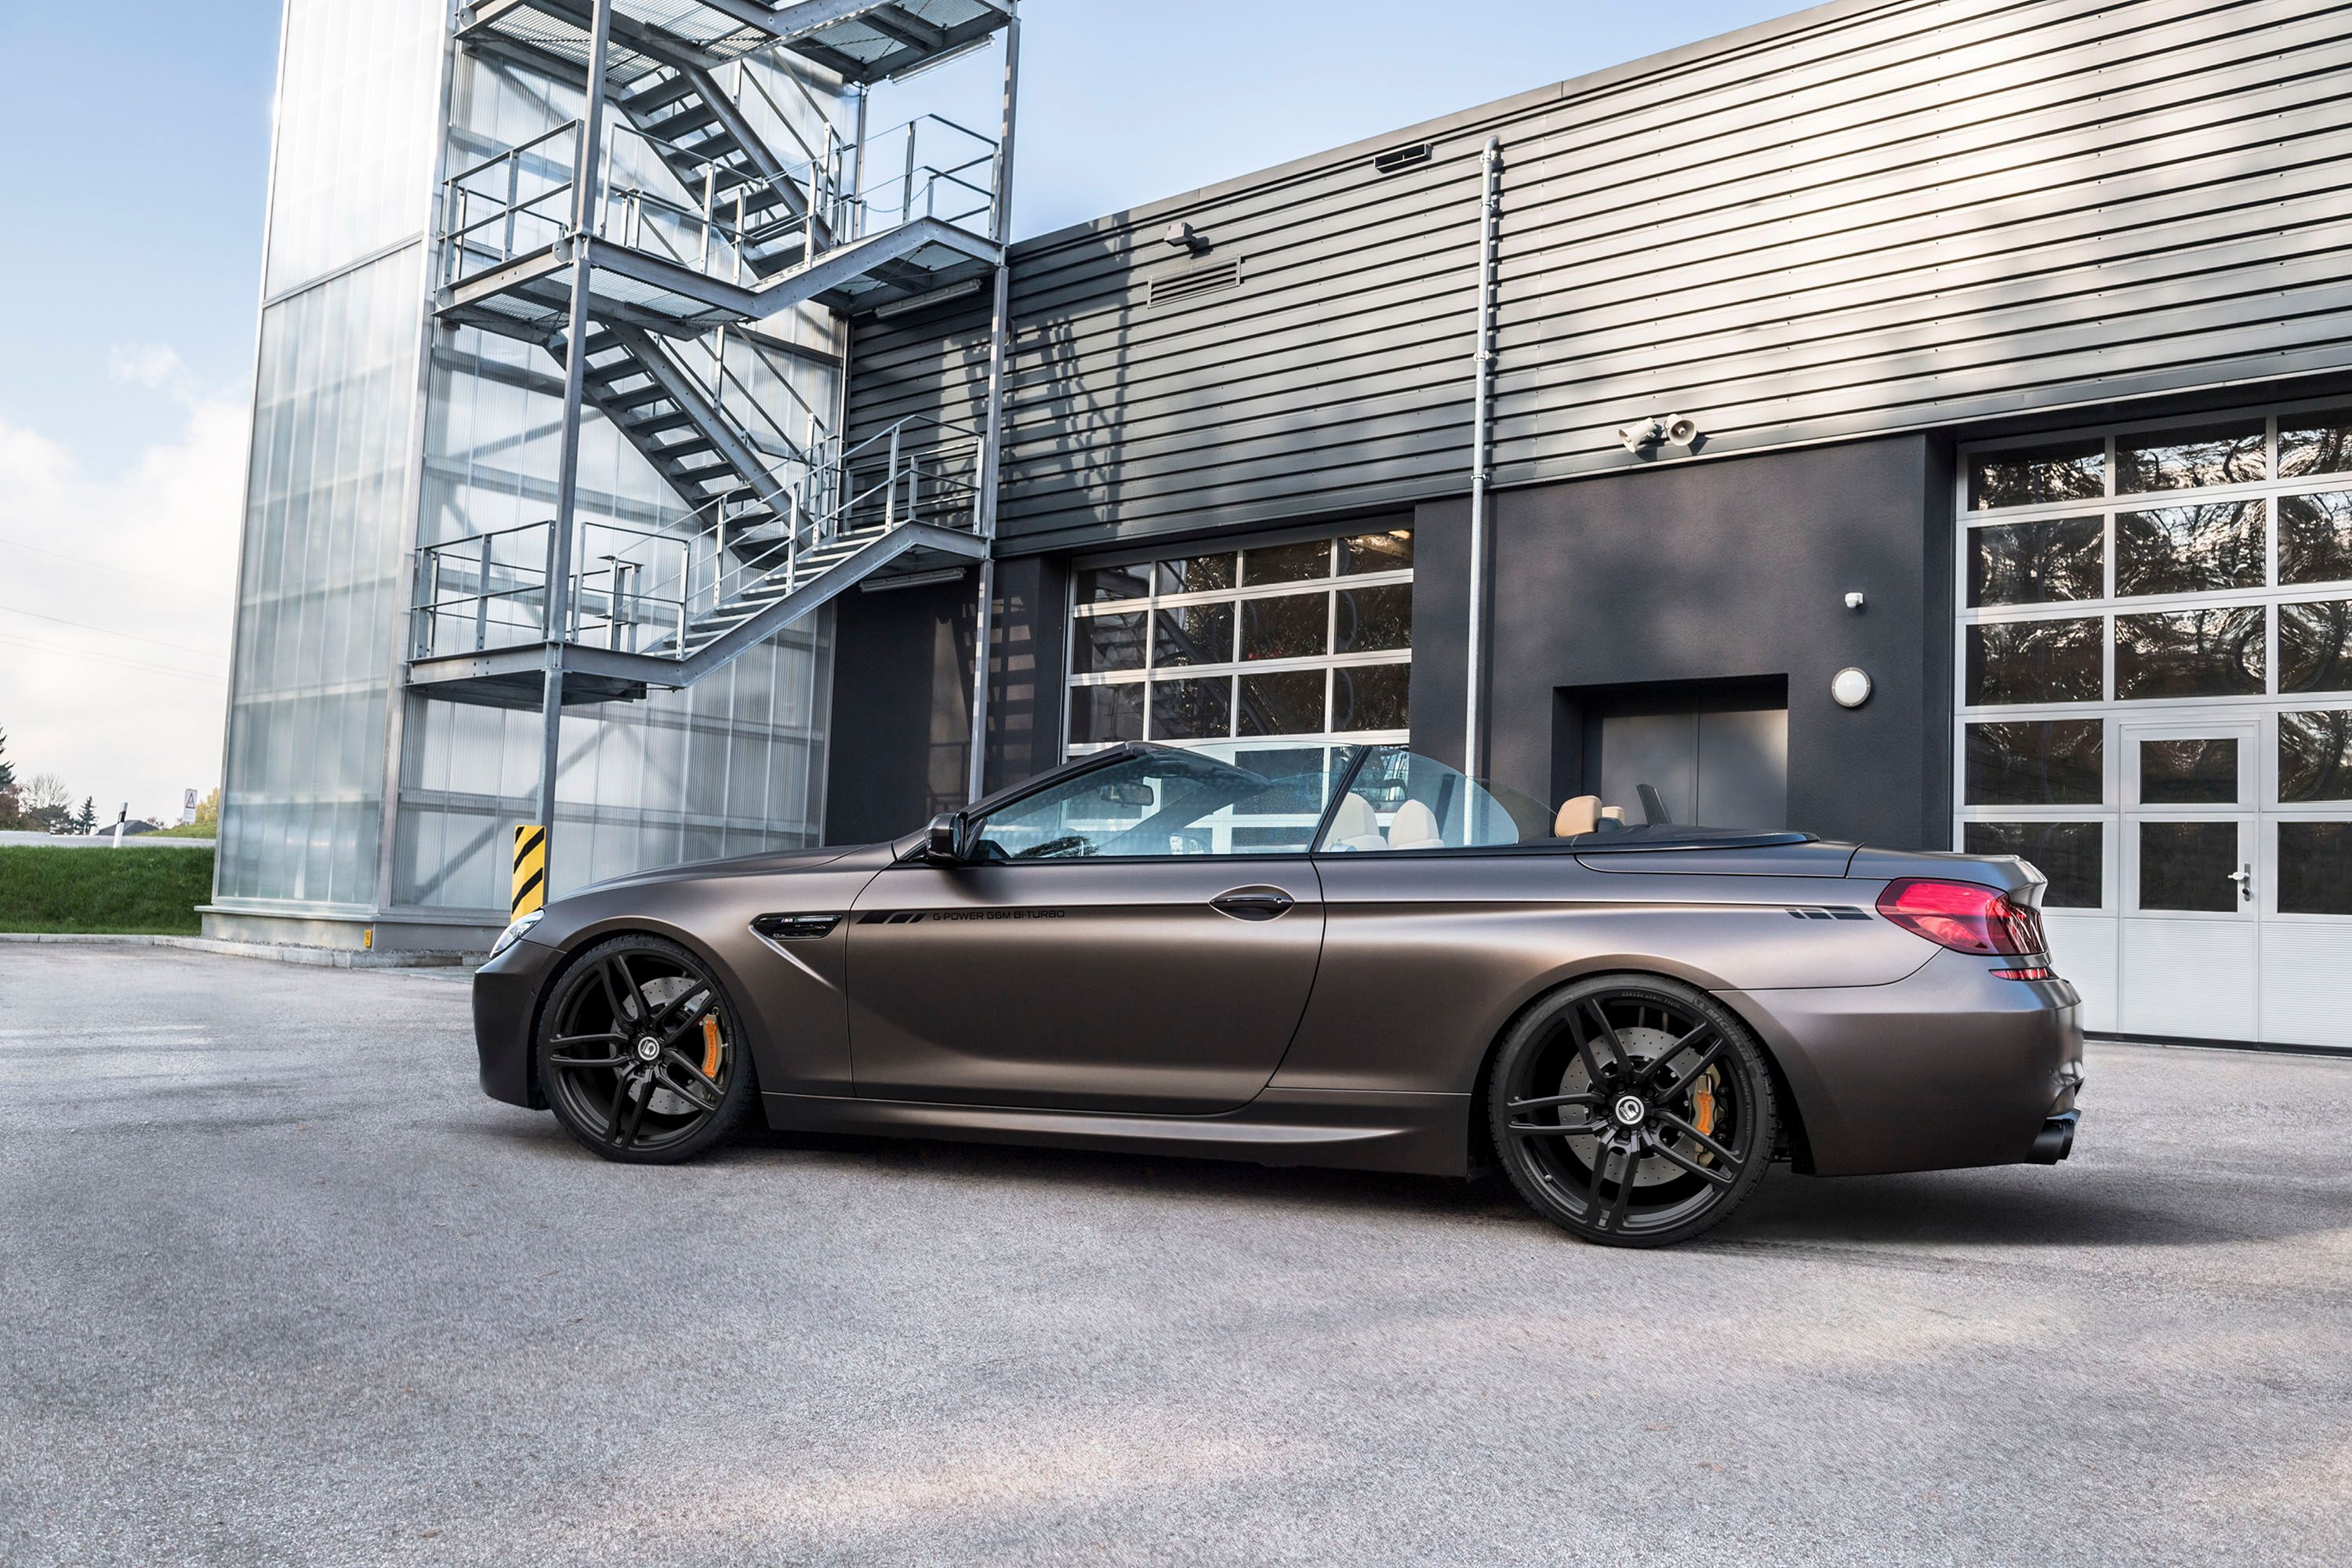 2017 BMW M6 Convertible by G-Power